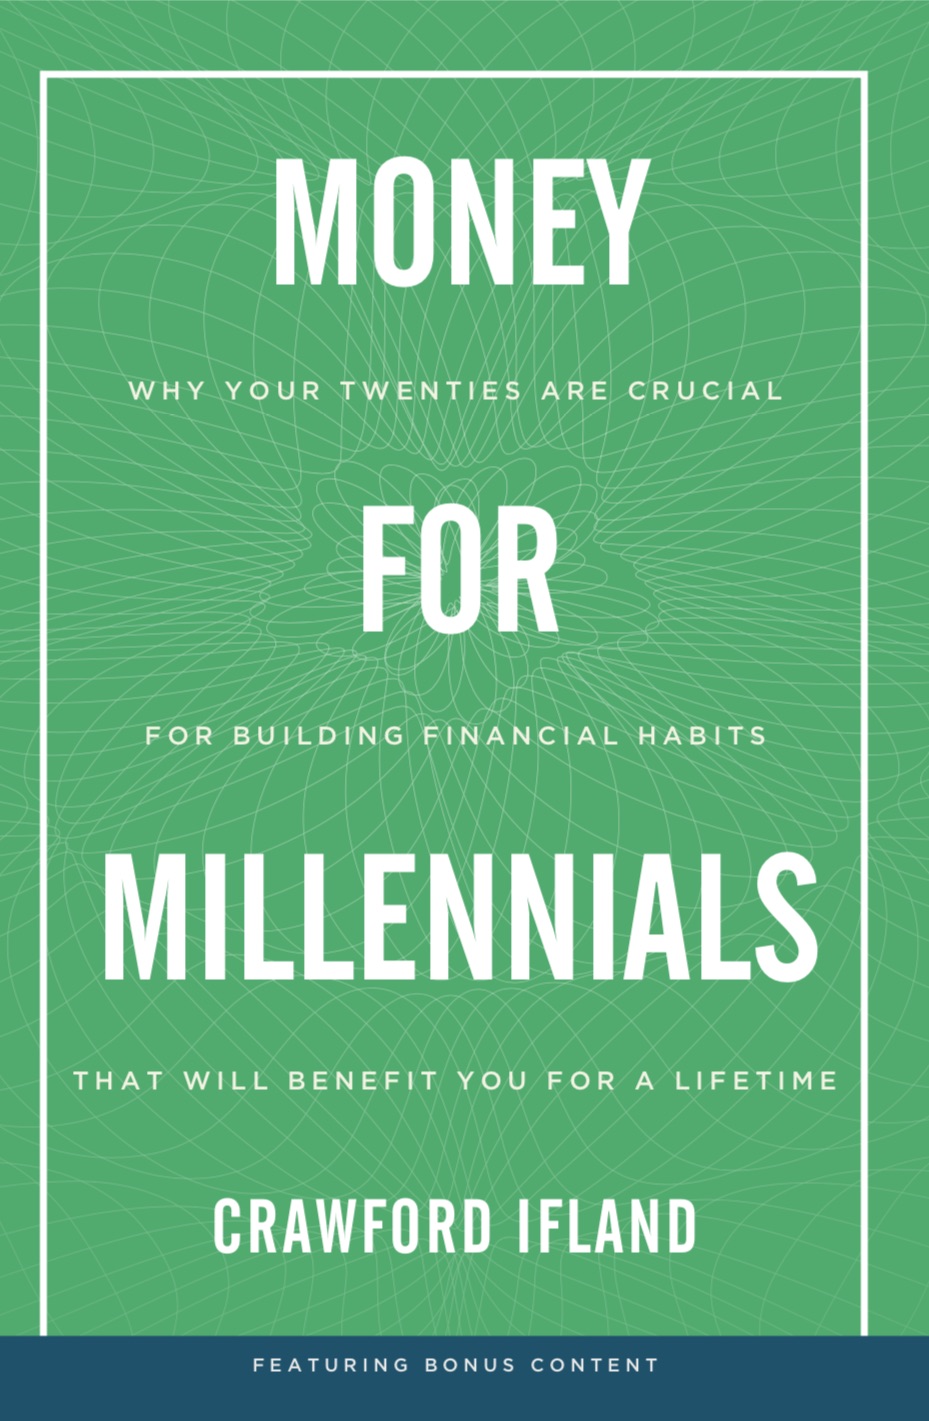 FREE: Money for Millennials by Crawford Ifland